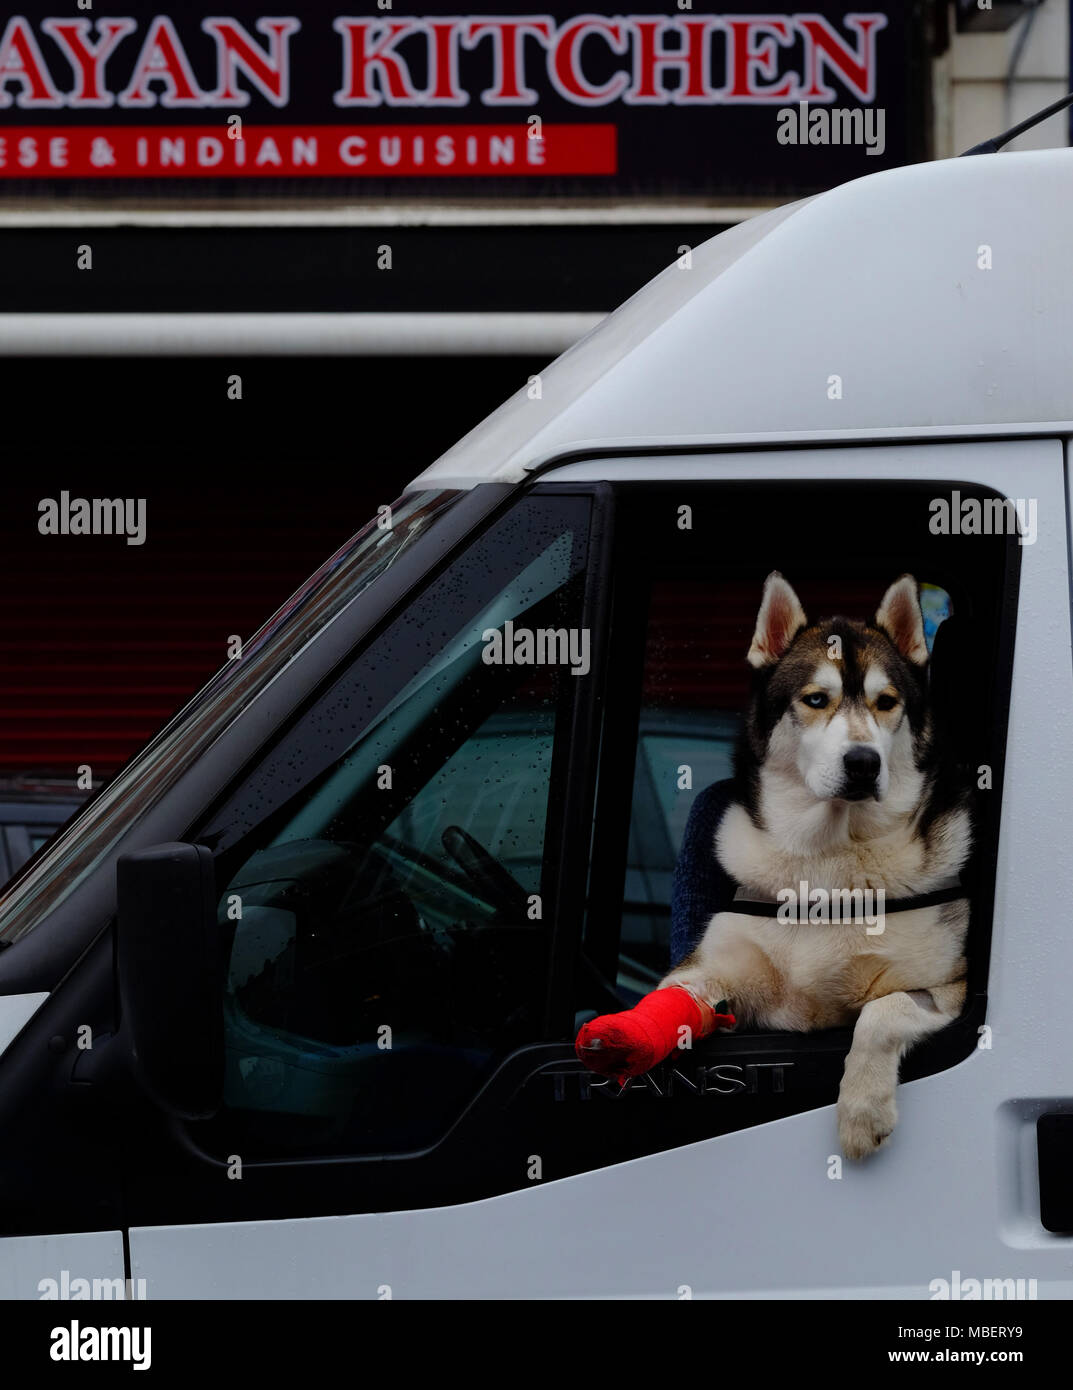 A beautiful 2 year old Husky dog with a broken leg leans out of the window of a van in Harrow, its leg in a red plaster cast Stock Photo